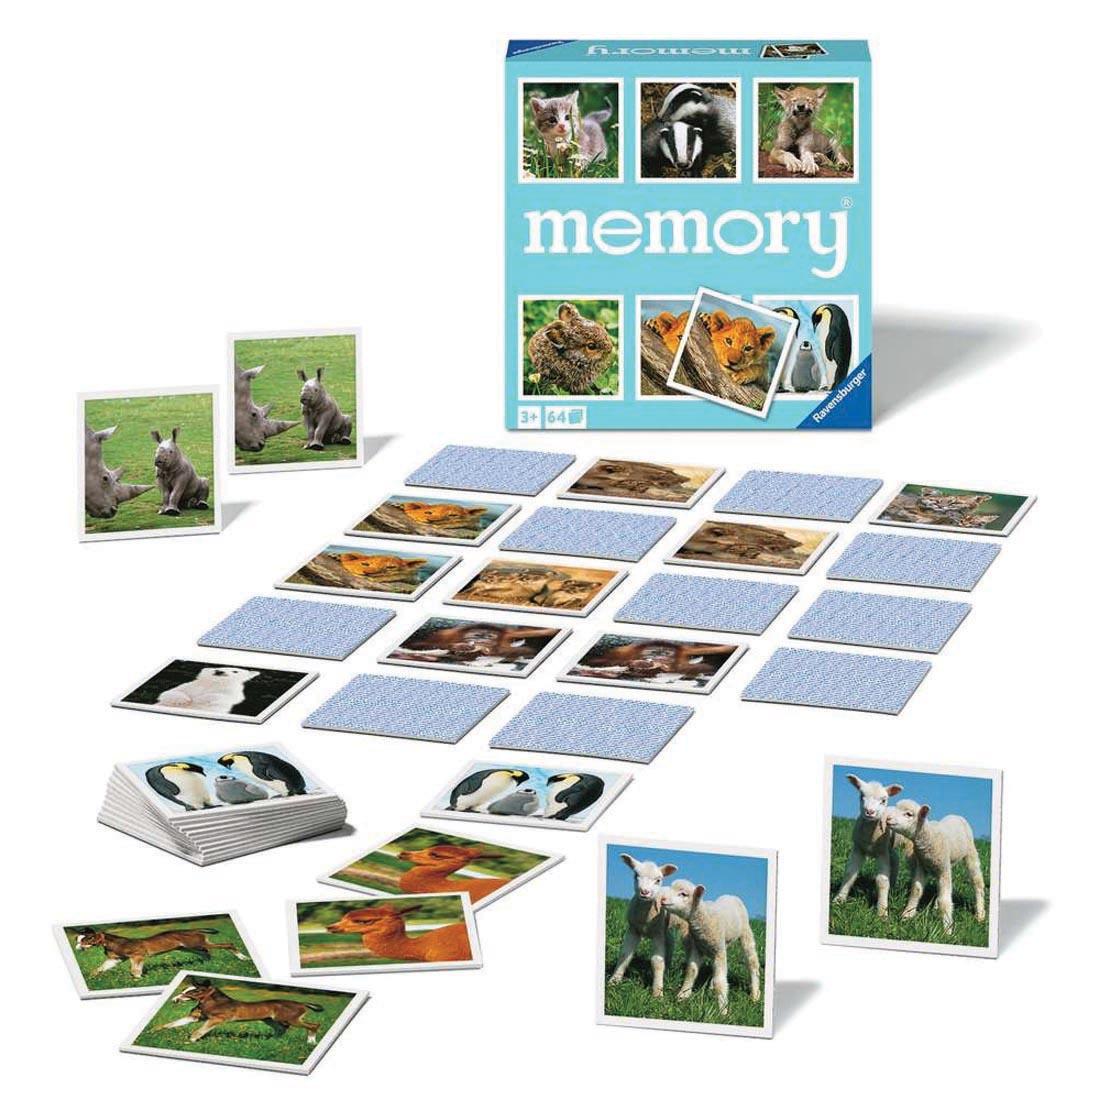 box and contents of Baby Animals Memory Game